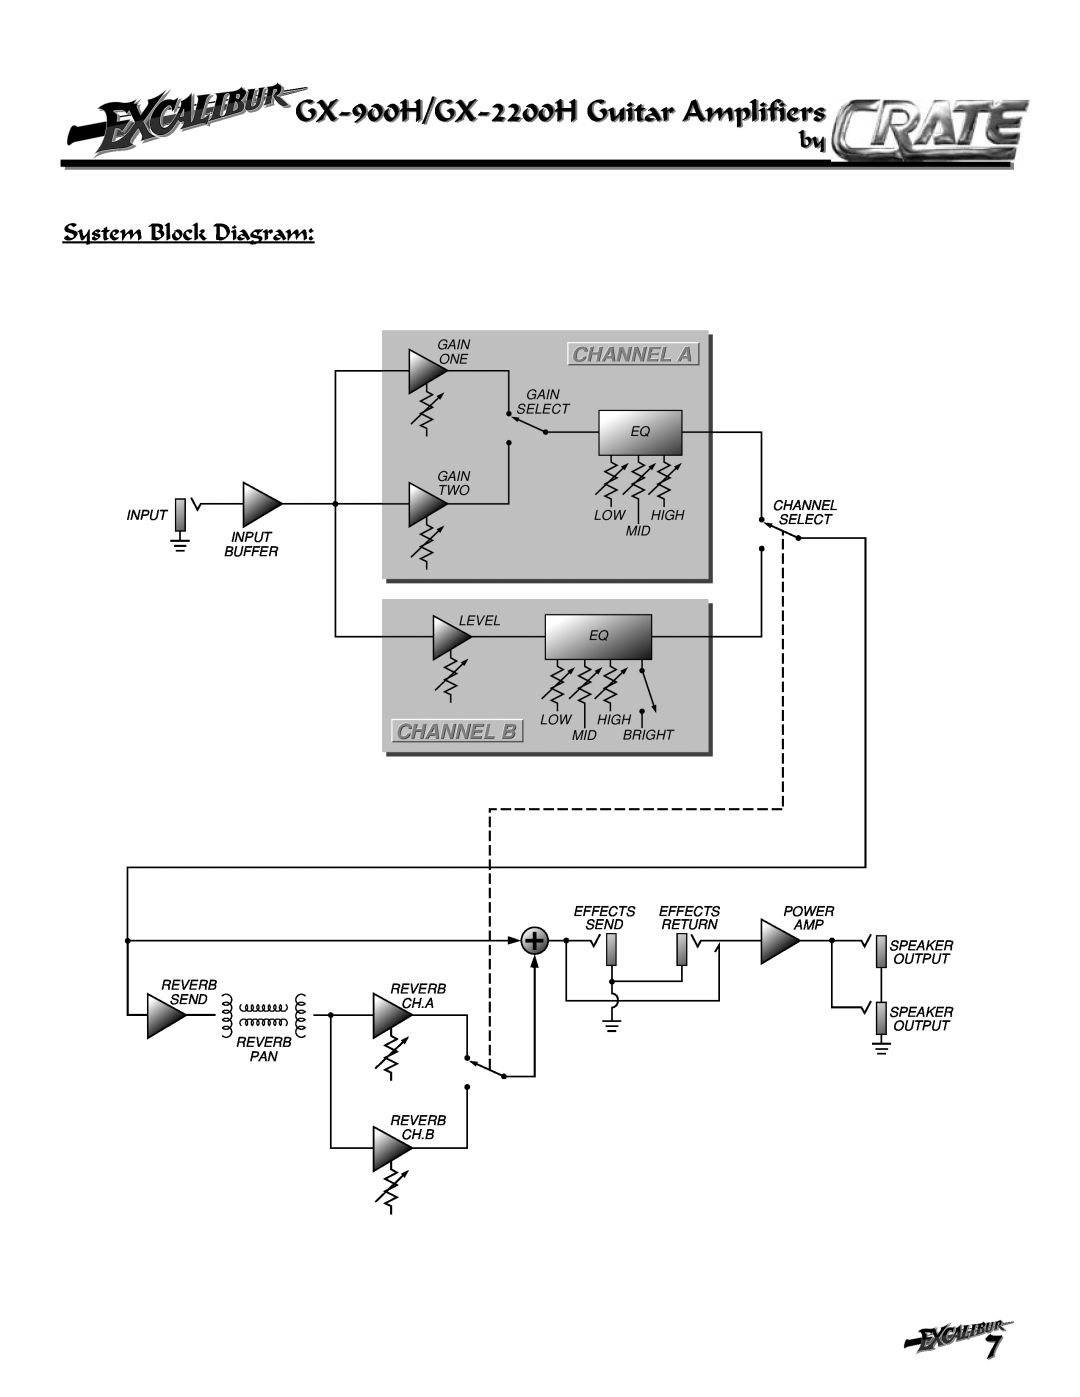 Crate Amplifiers owner manual by System Block Diagram, GX-900H/GX-2200H Guitar Amplifiers, Channel A, Channel B 